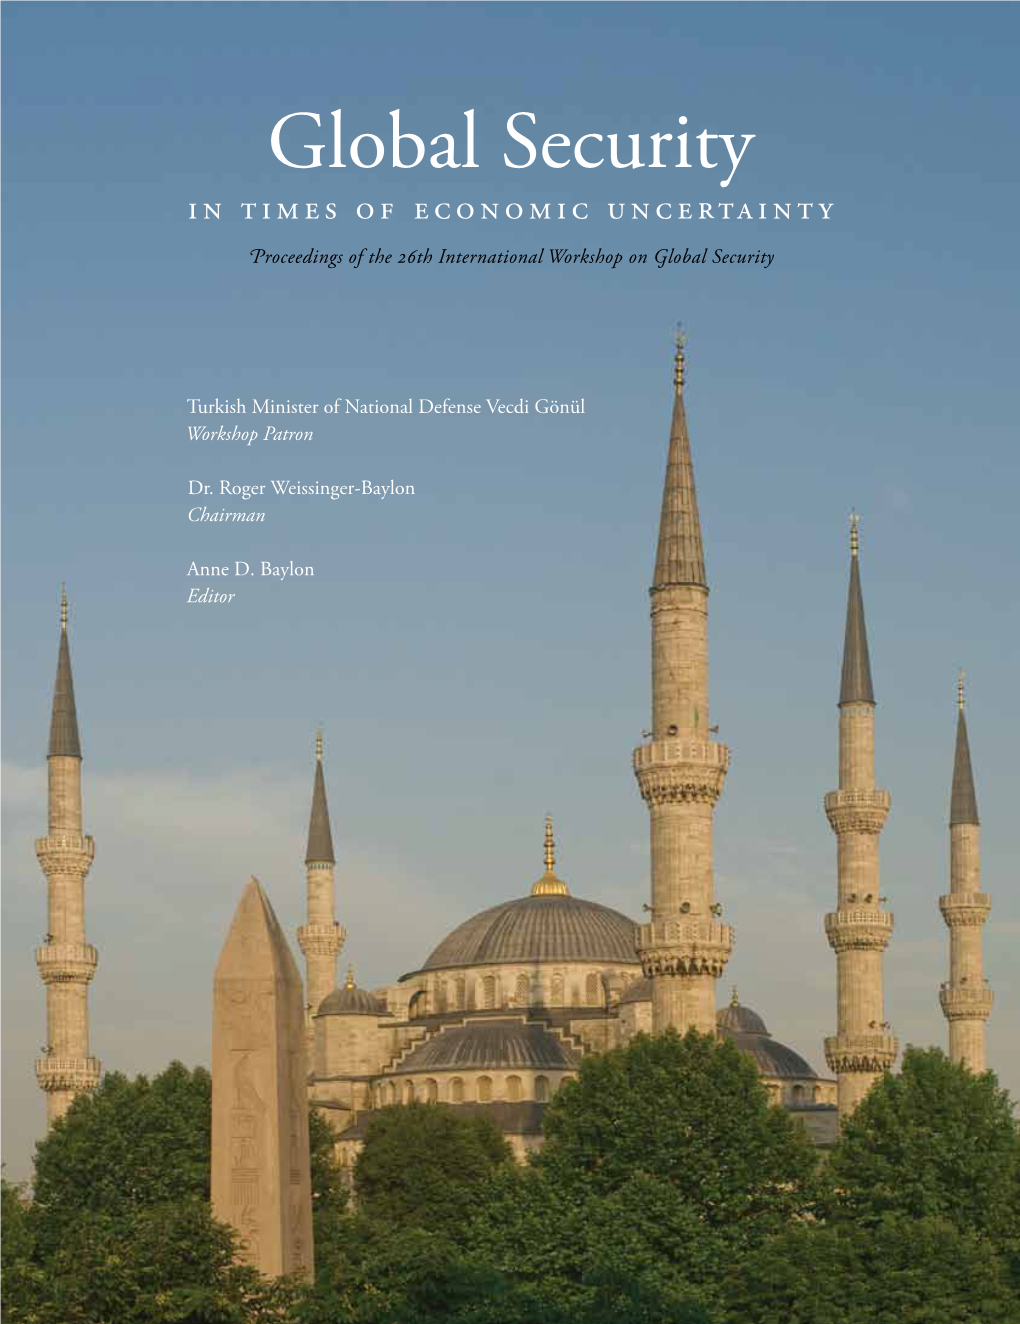 Global Security in Times of Economic Uncertainty Proceedings of the 26Th International Workshop on Global Security